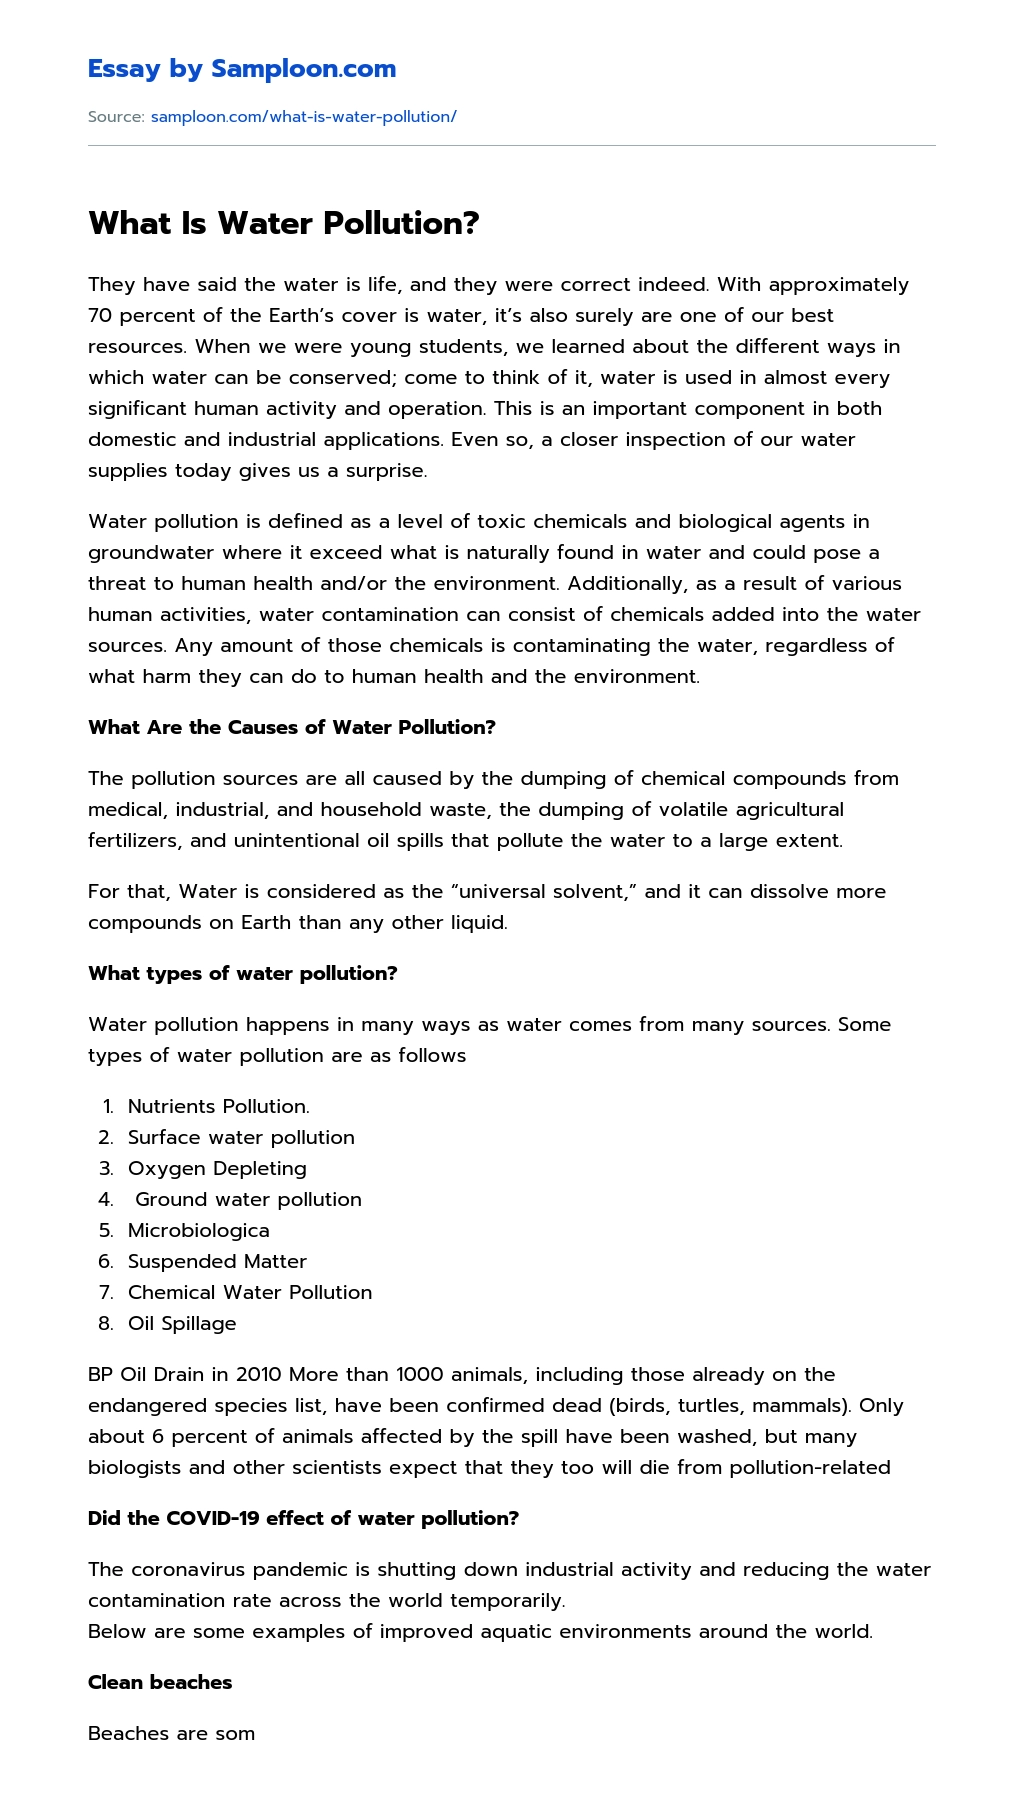 What Is Water Pollution? essay